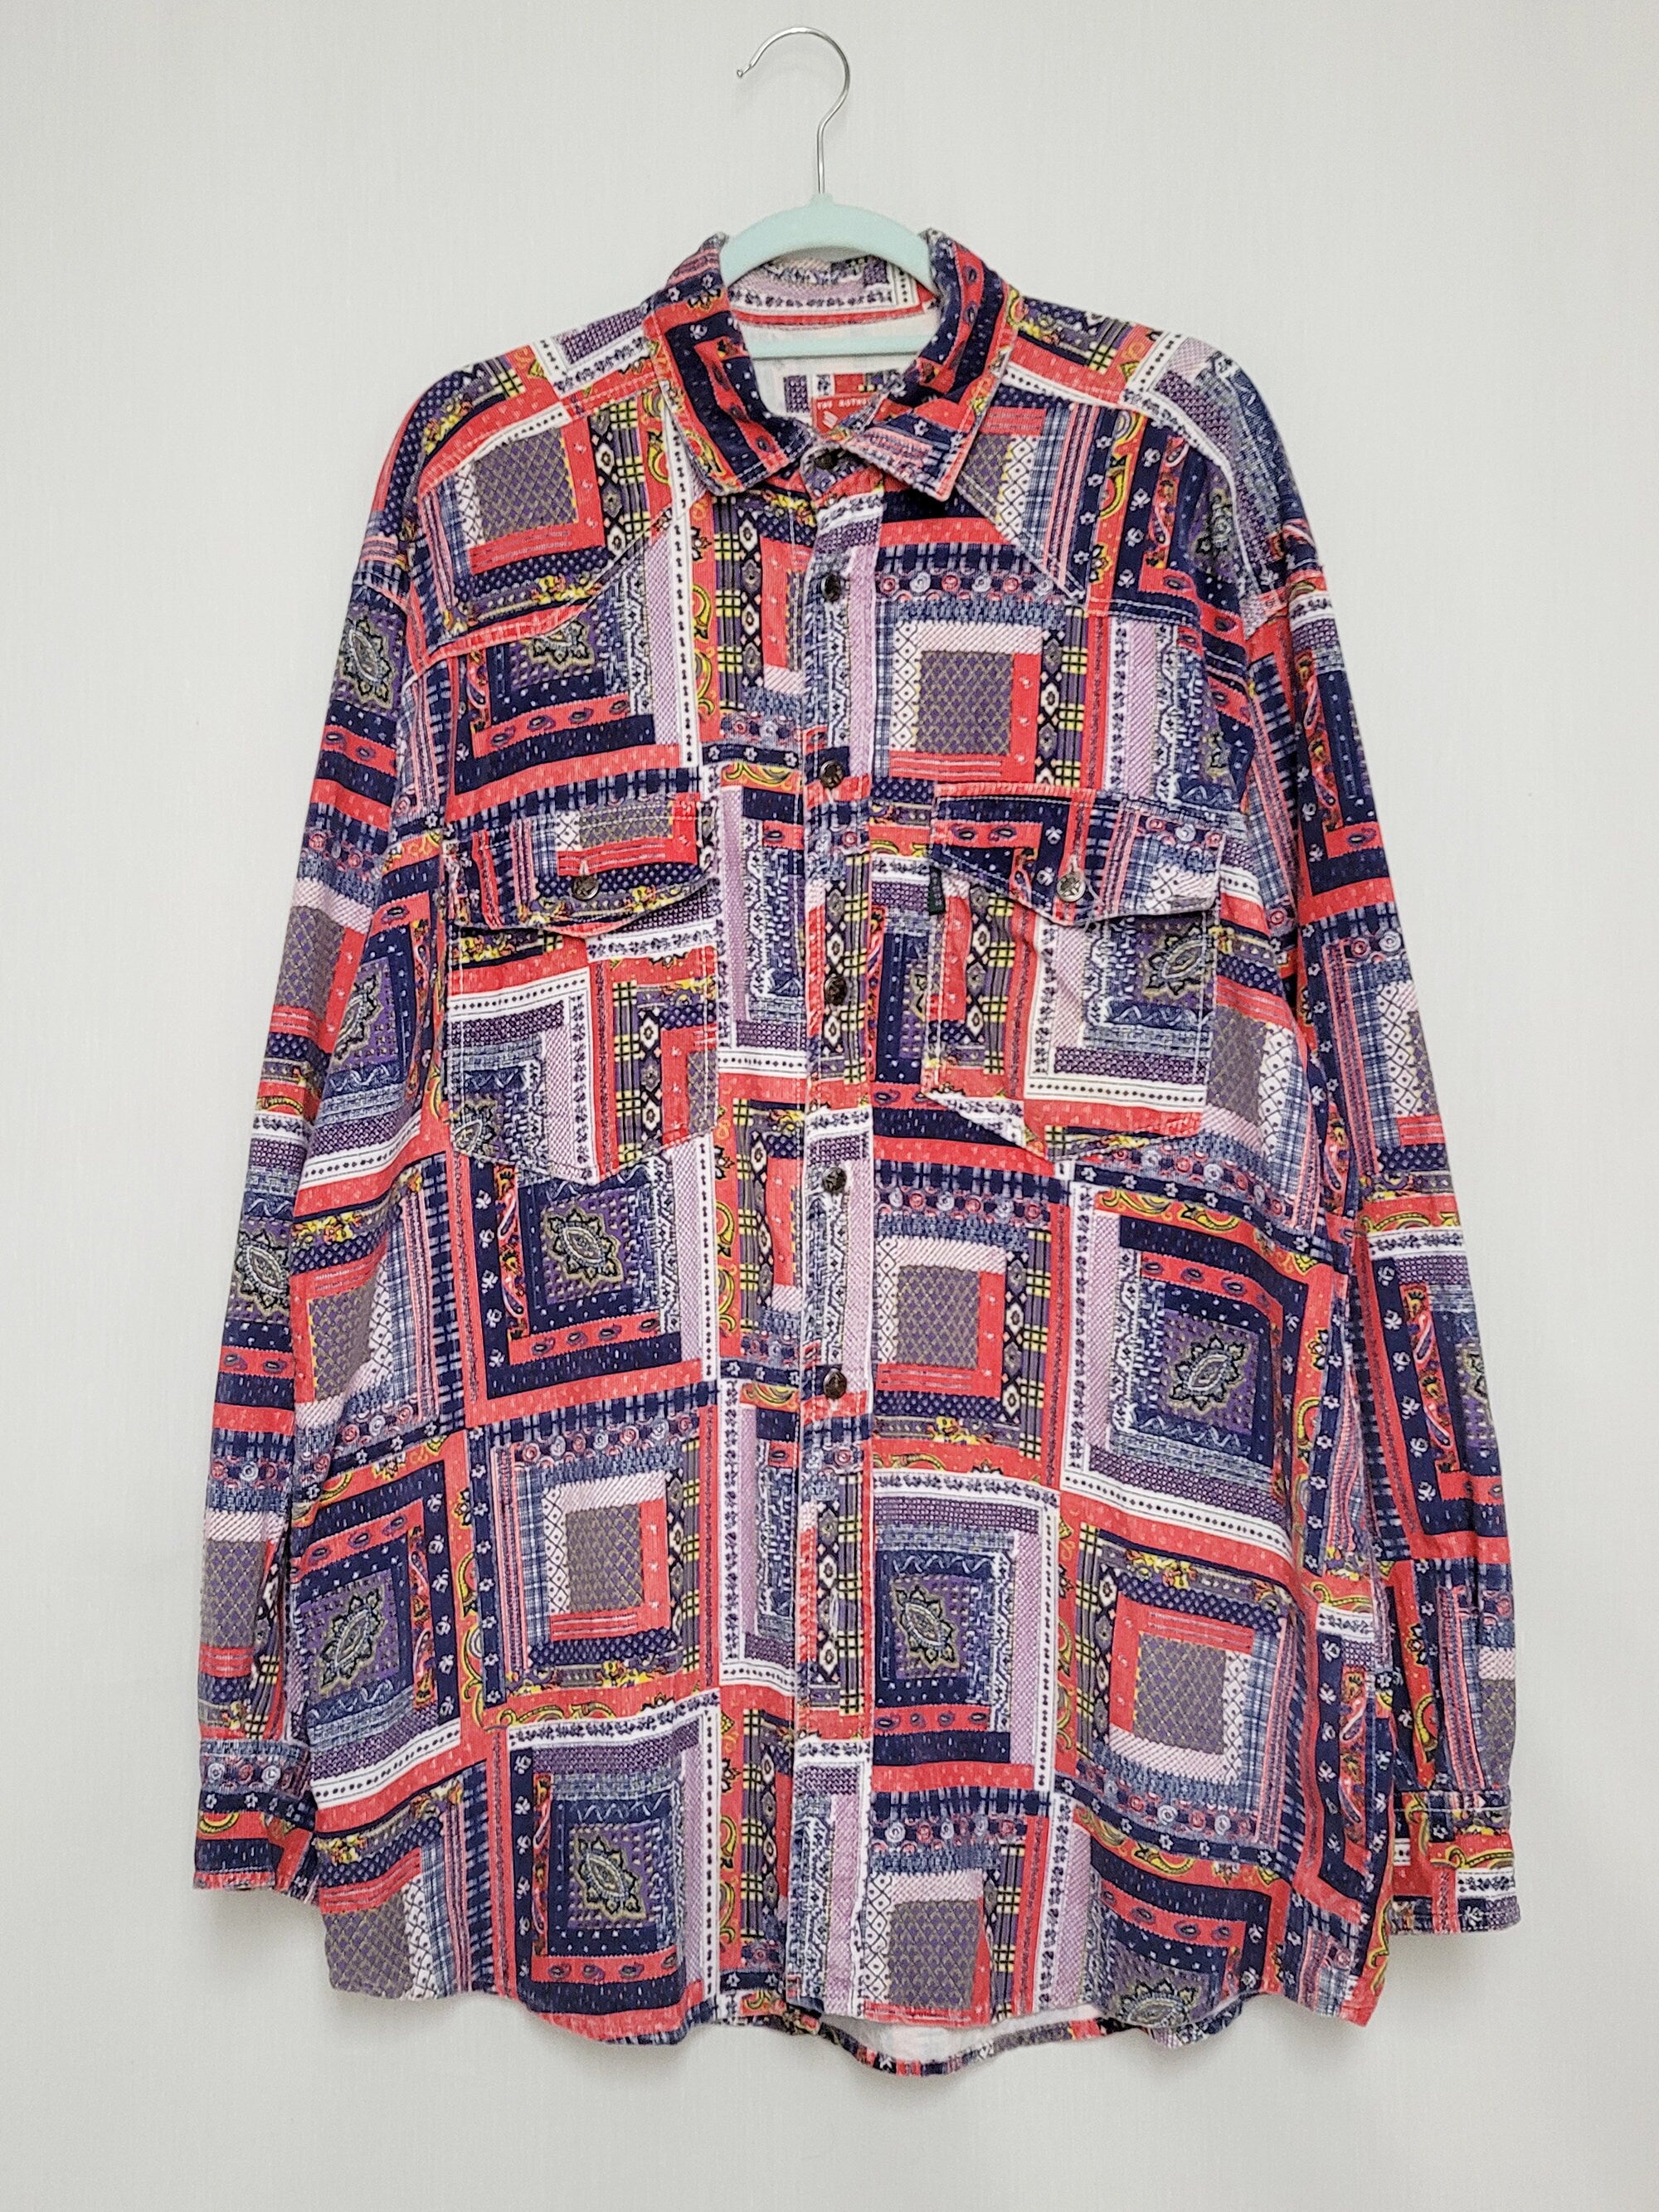 Vintage 90s menswear abstract colorful unisex oversize shirt